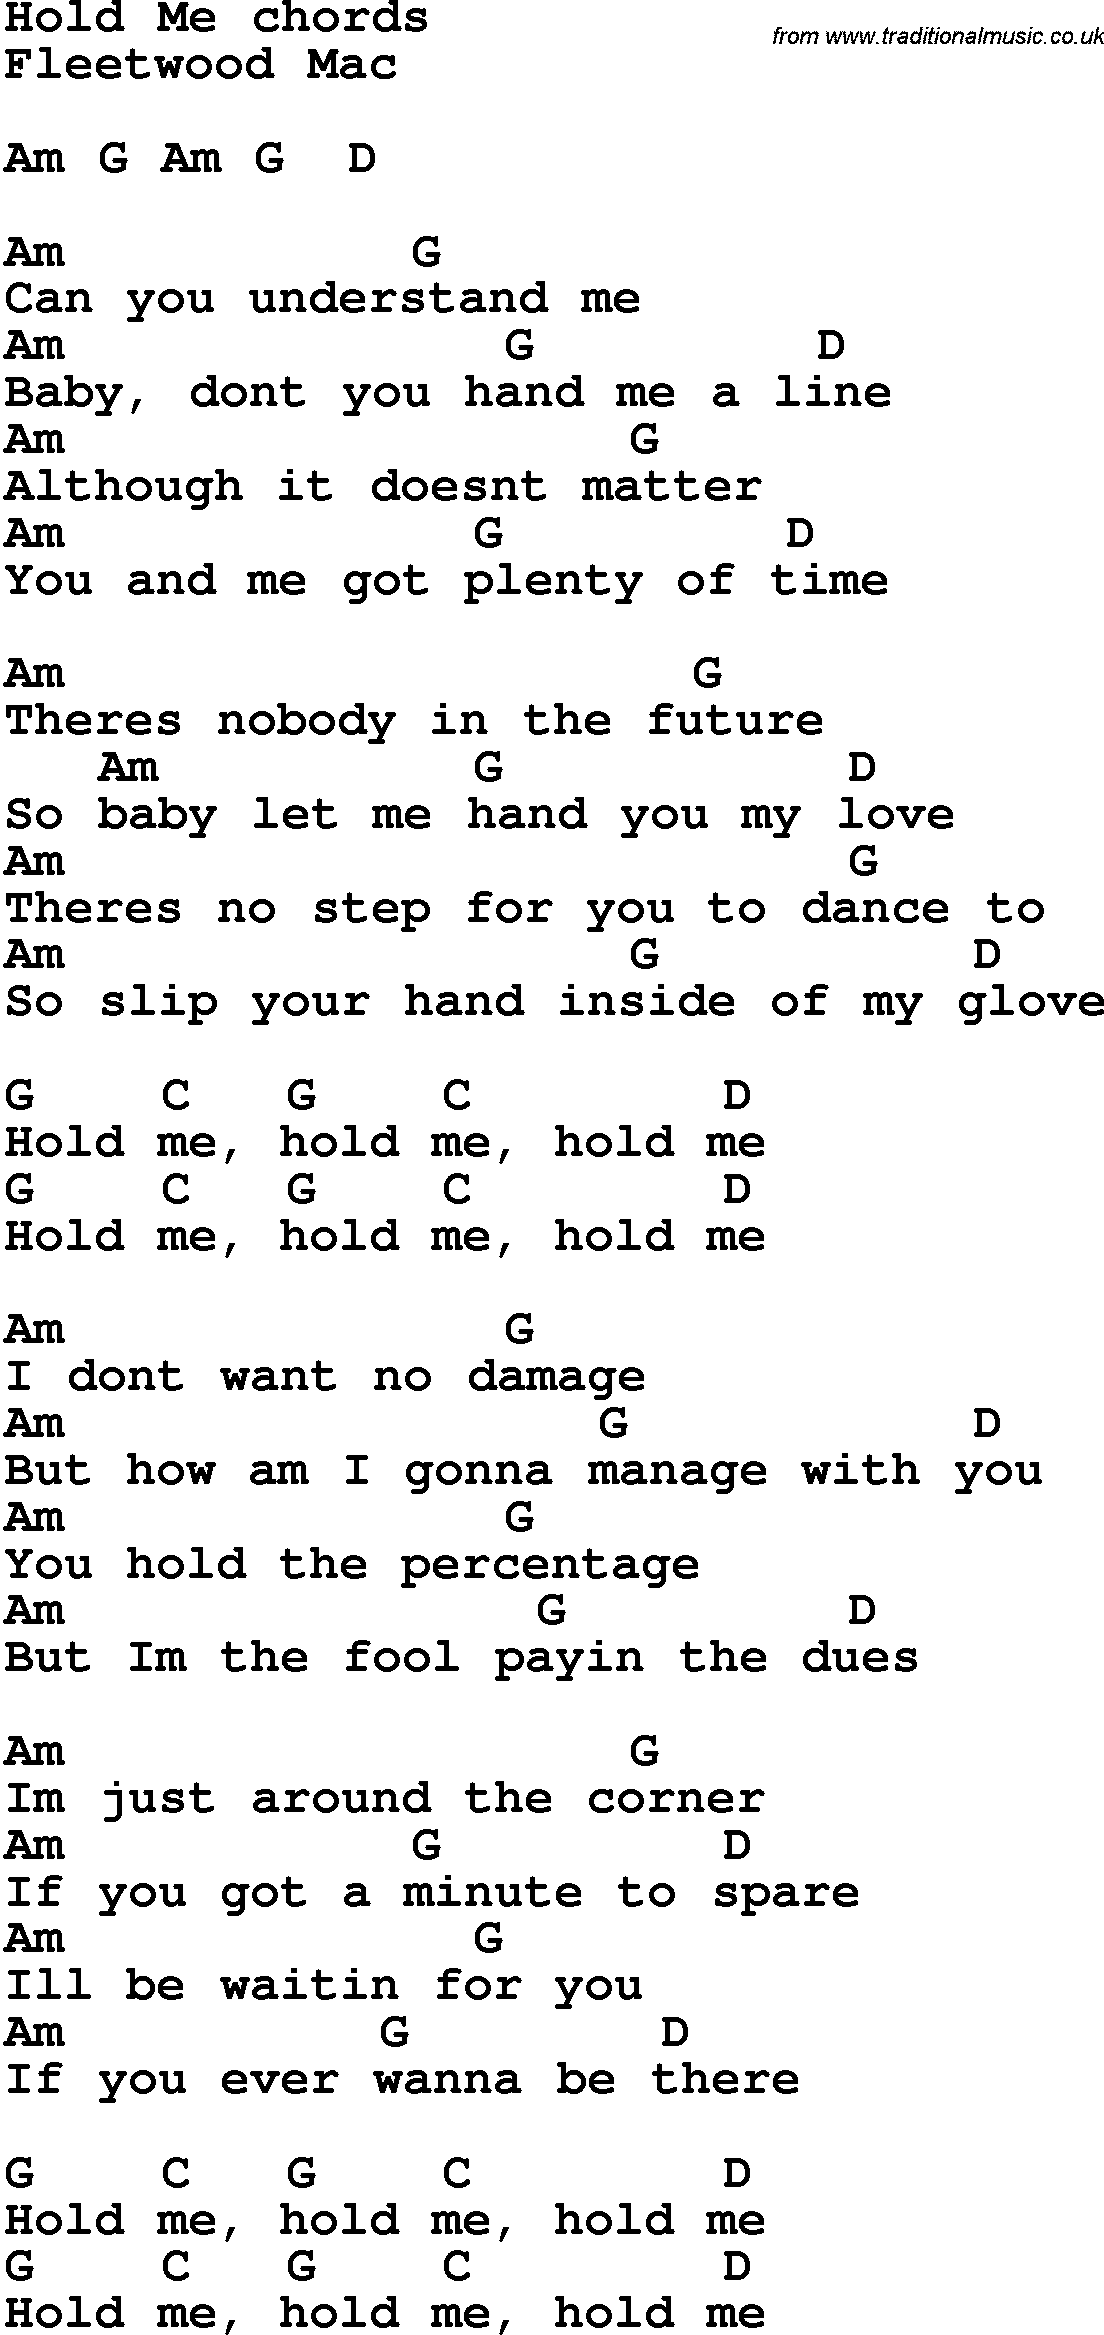 Song Lyrics with guitar chords for Hold Me